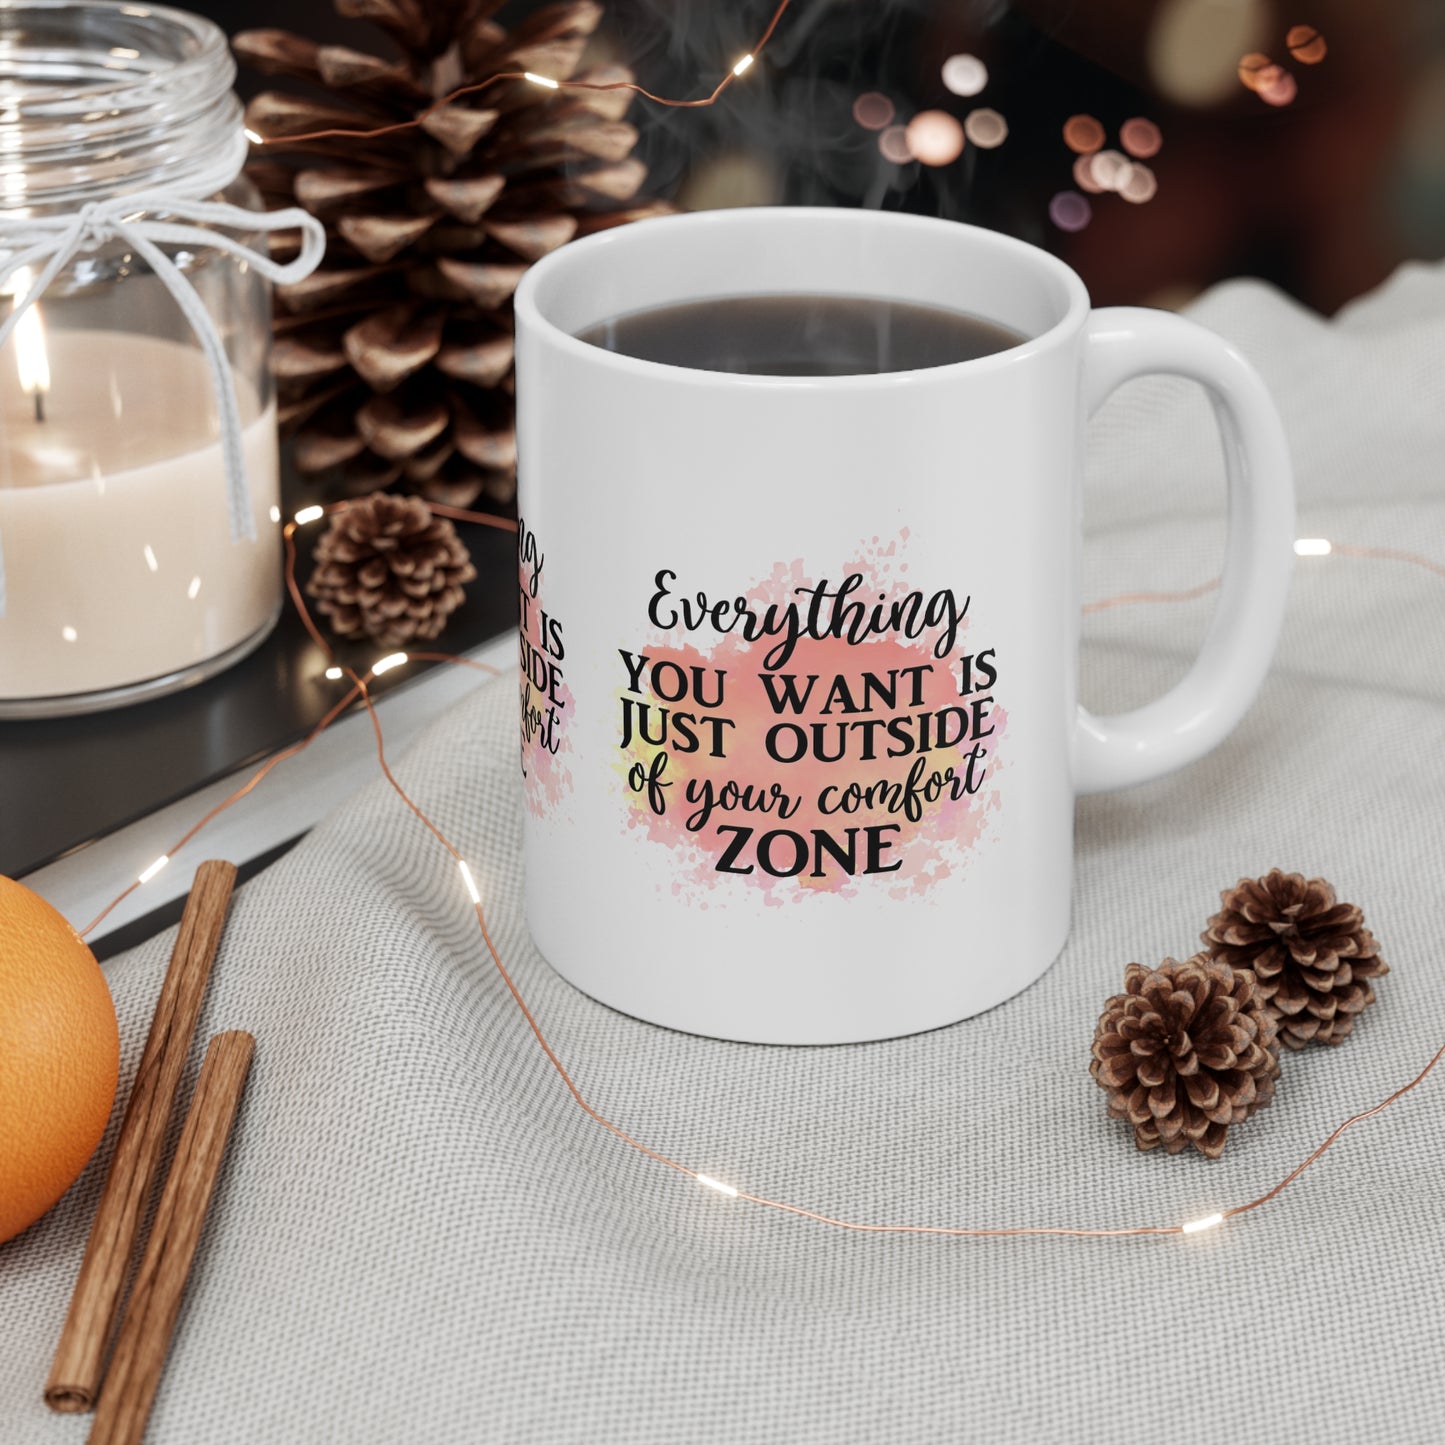 "EVERYTHING YOU WANT is Just Outside of your Comfort Zone" MUG - MUGSCITY23™️ Free Shipping